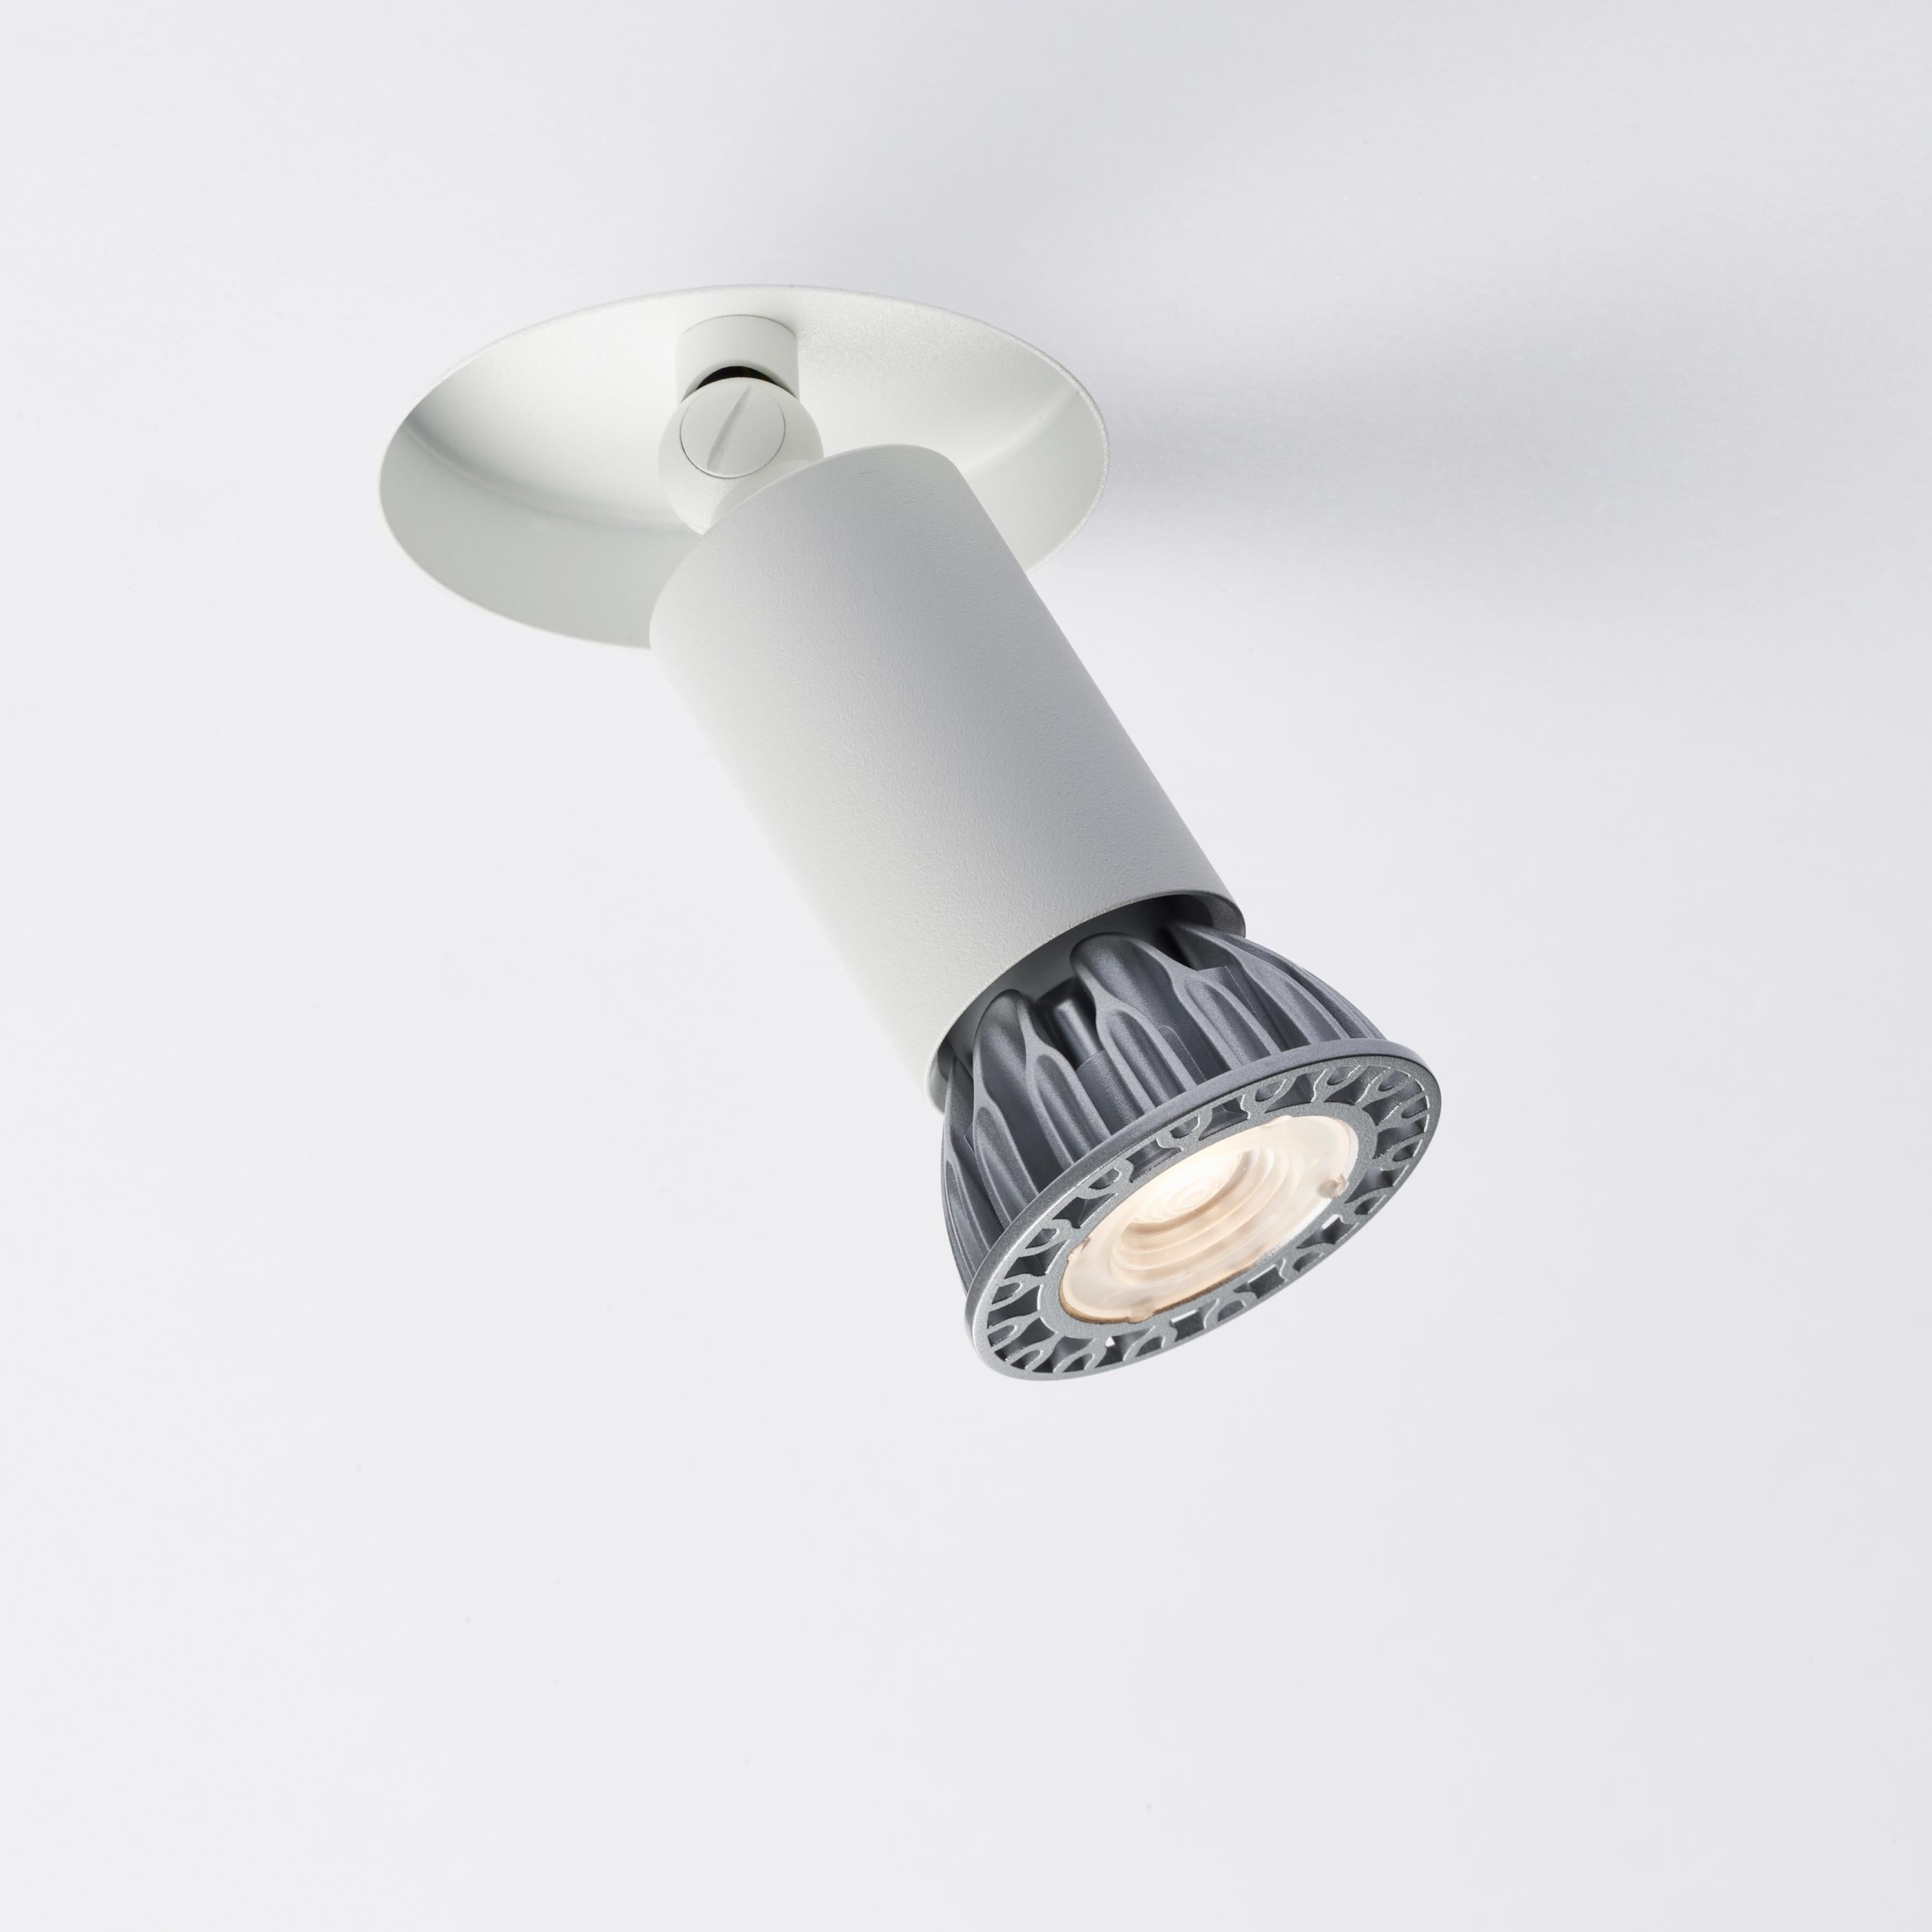 Trimless recessed adjustable downlighter (both for installation in plasterboard as in hard ceiling). Visible deep-set tube, be at one with the ceiling edge, complete with Optic-Spot, axial adjustable from 0° to 90° - directional from 0° to